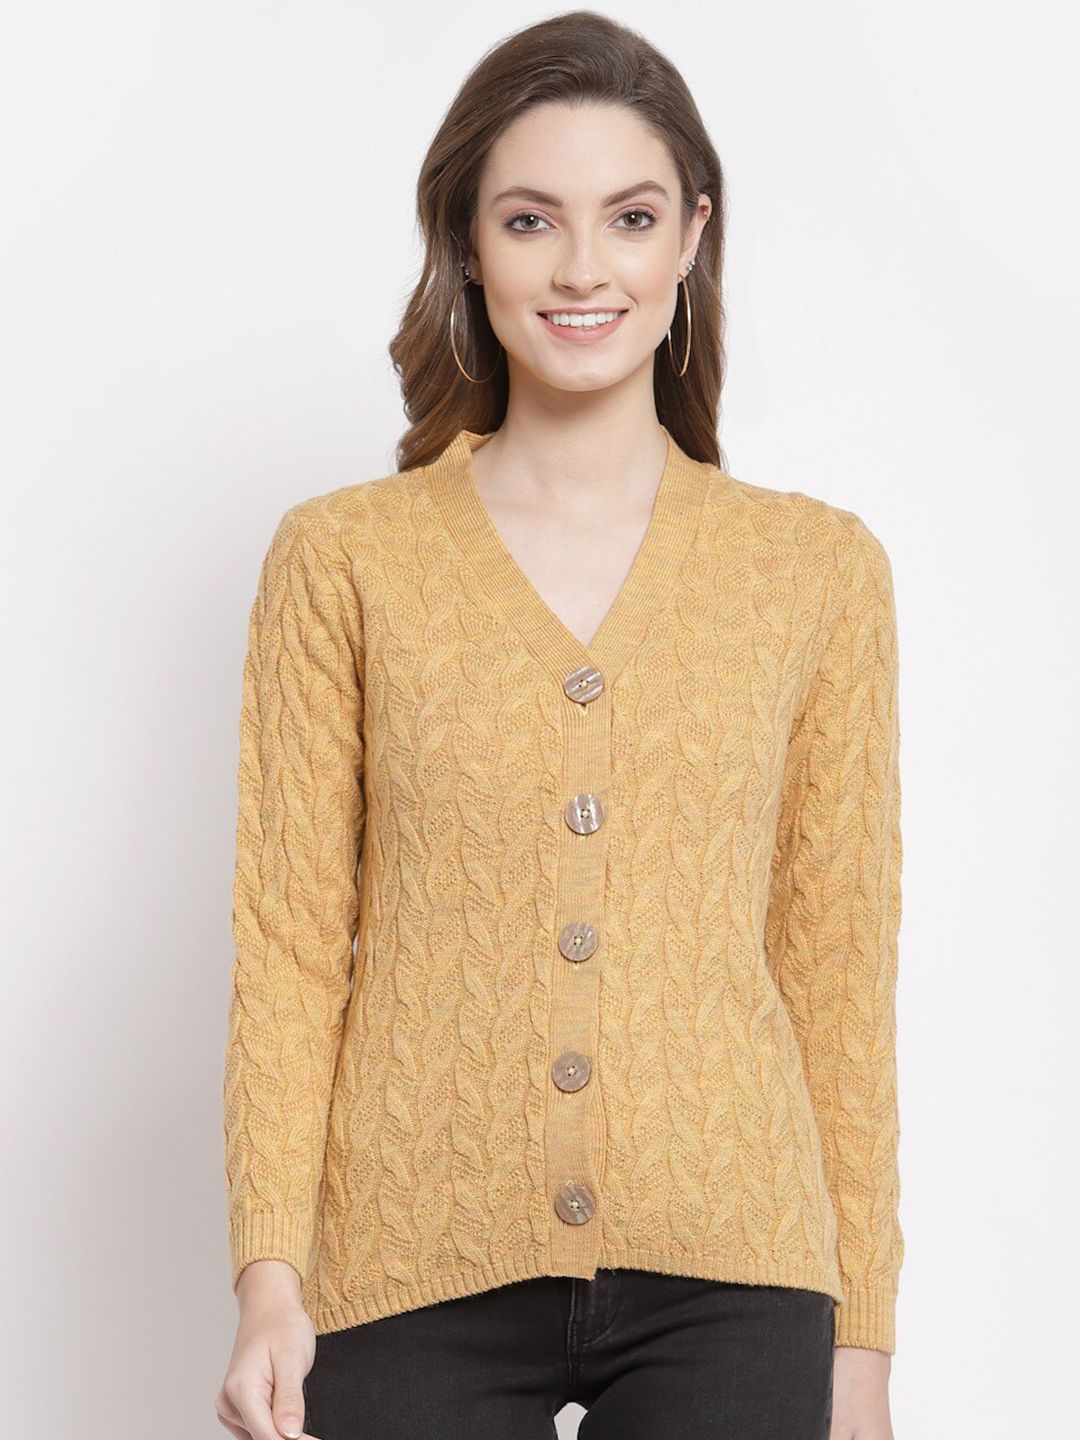 Kalt Women Gold-Toned Cable Knit Acrylic Cardigan Price in India